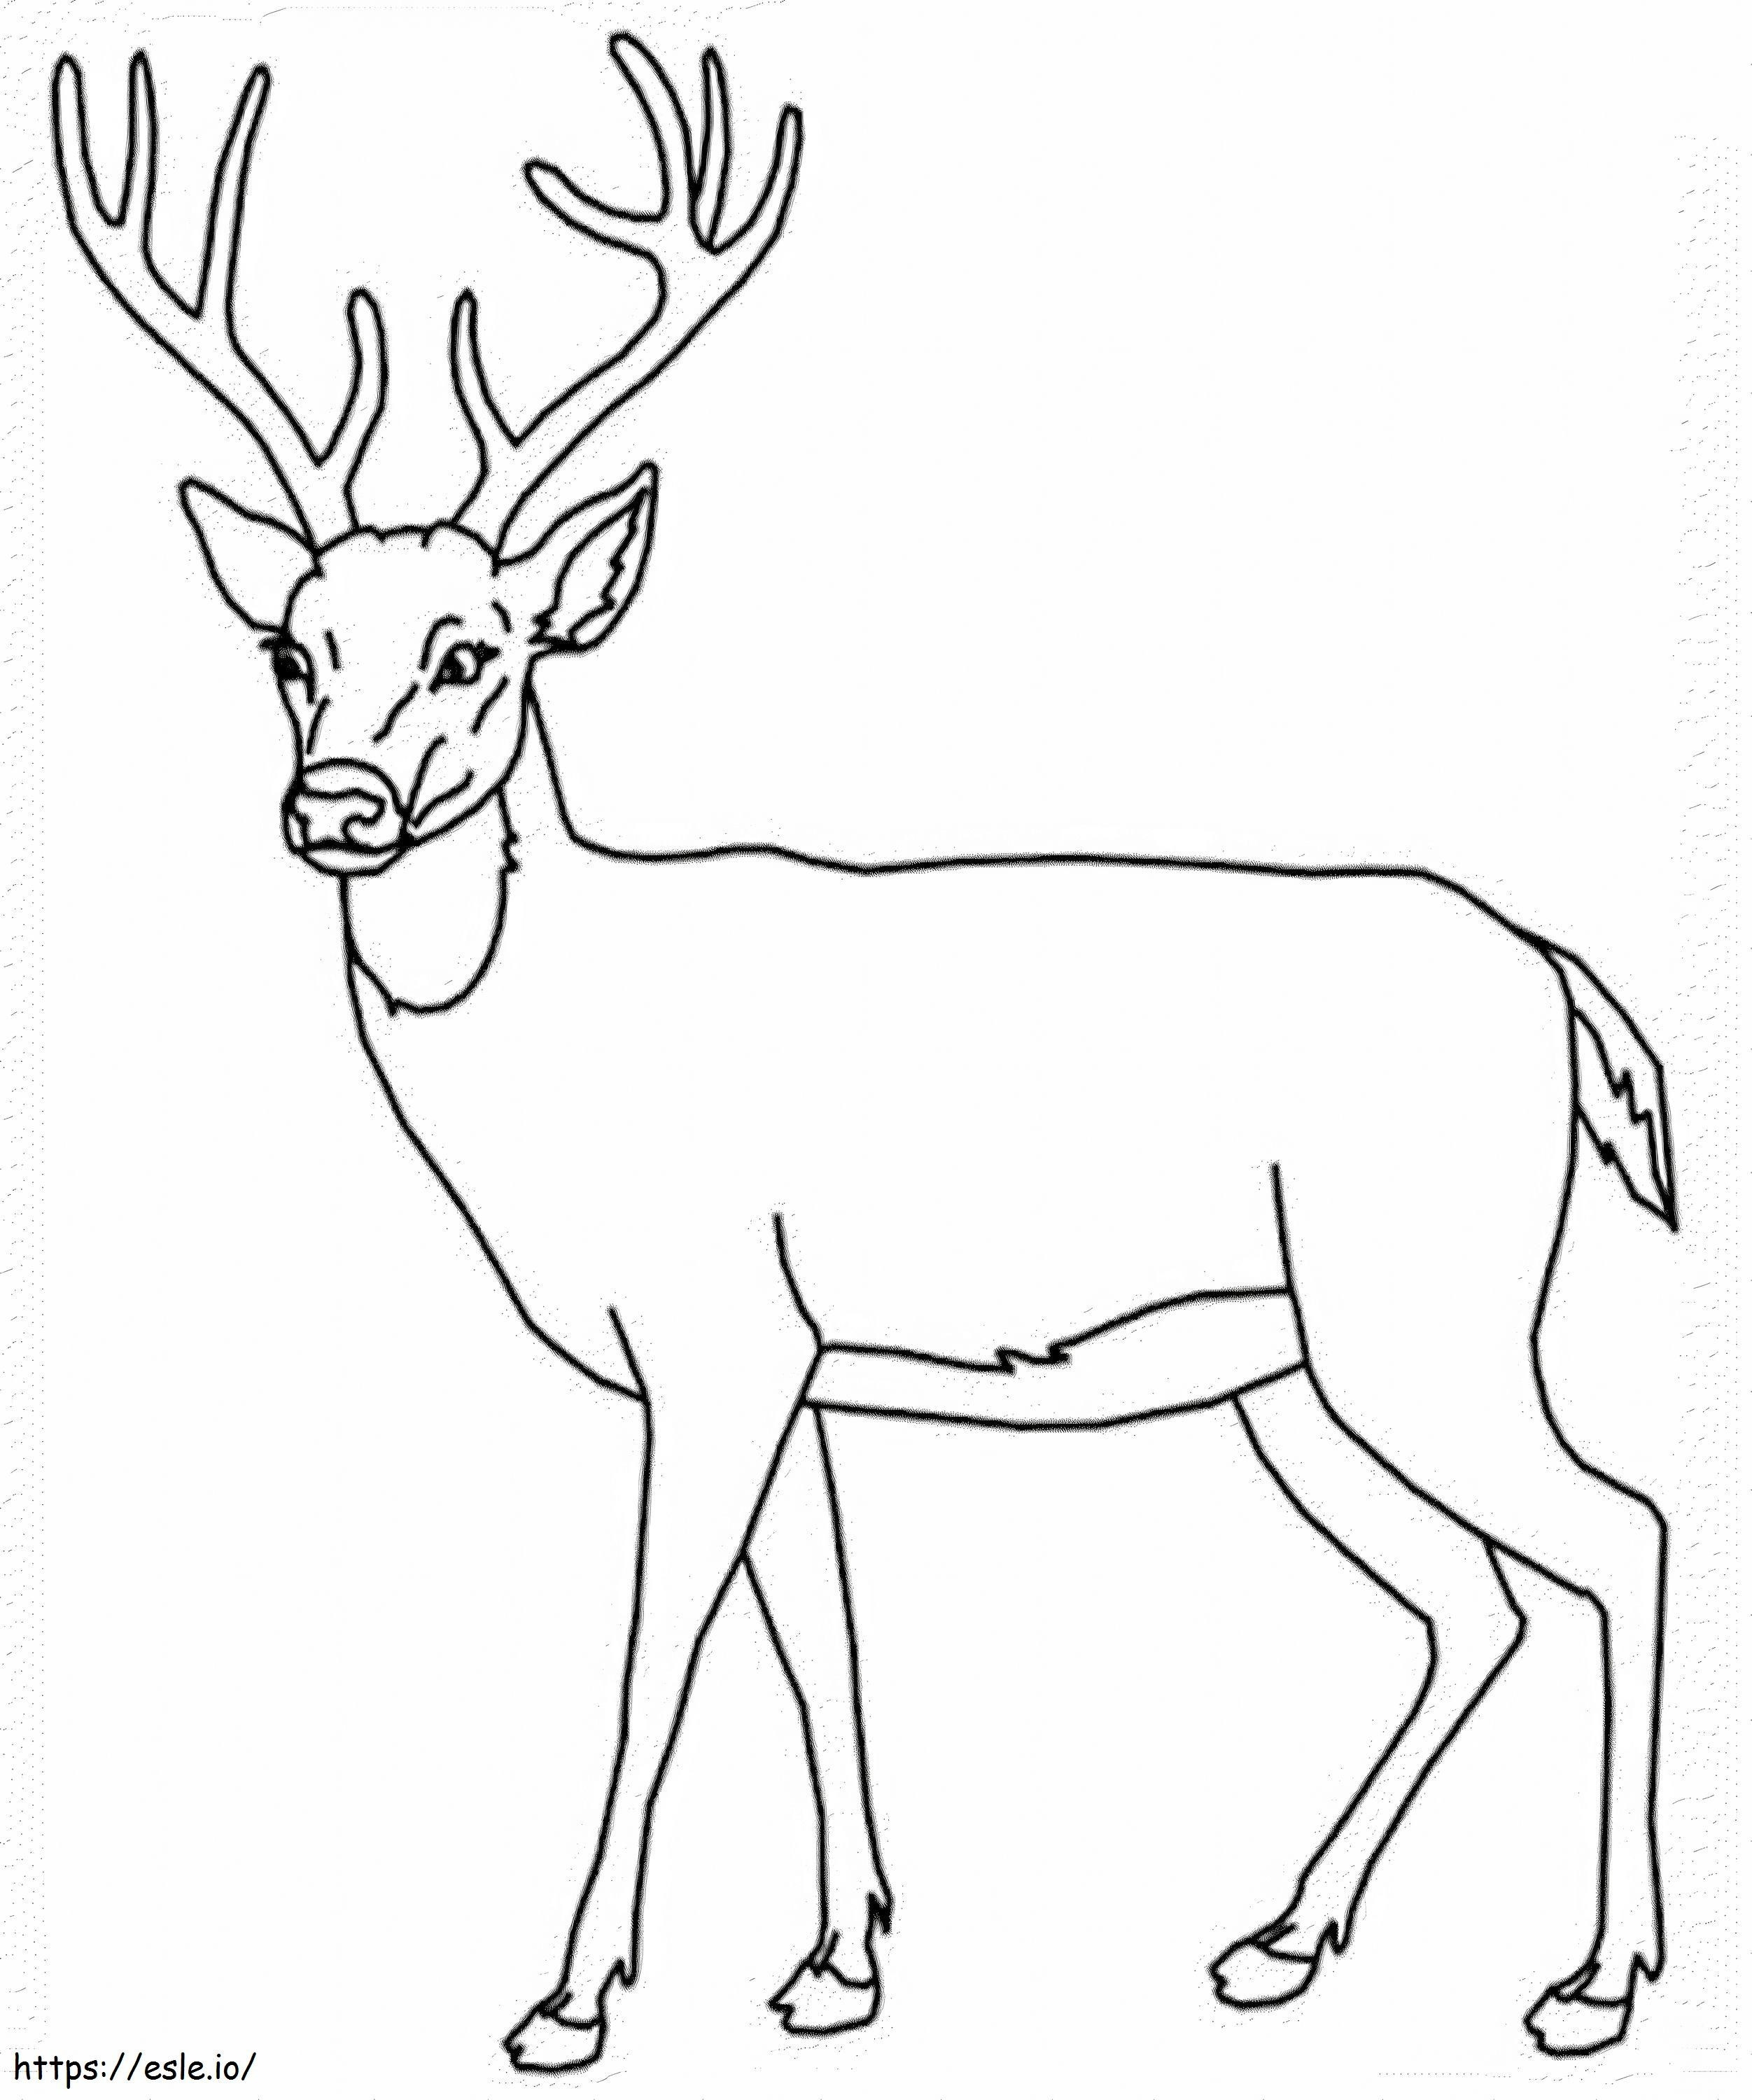 Awesome Deer coloring page